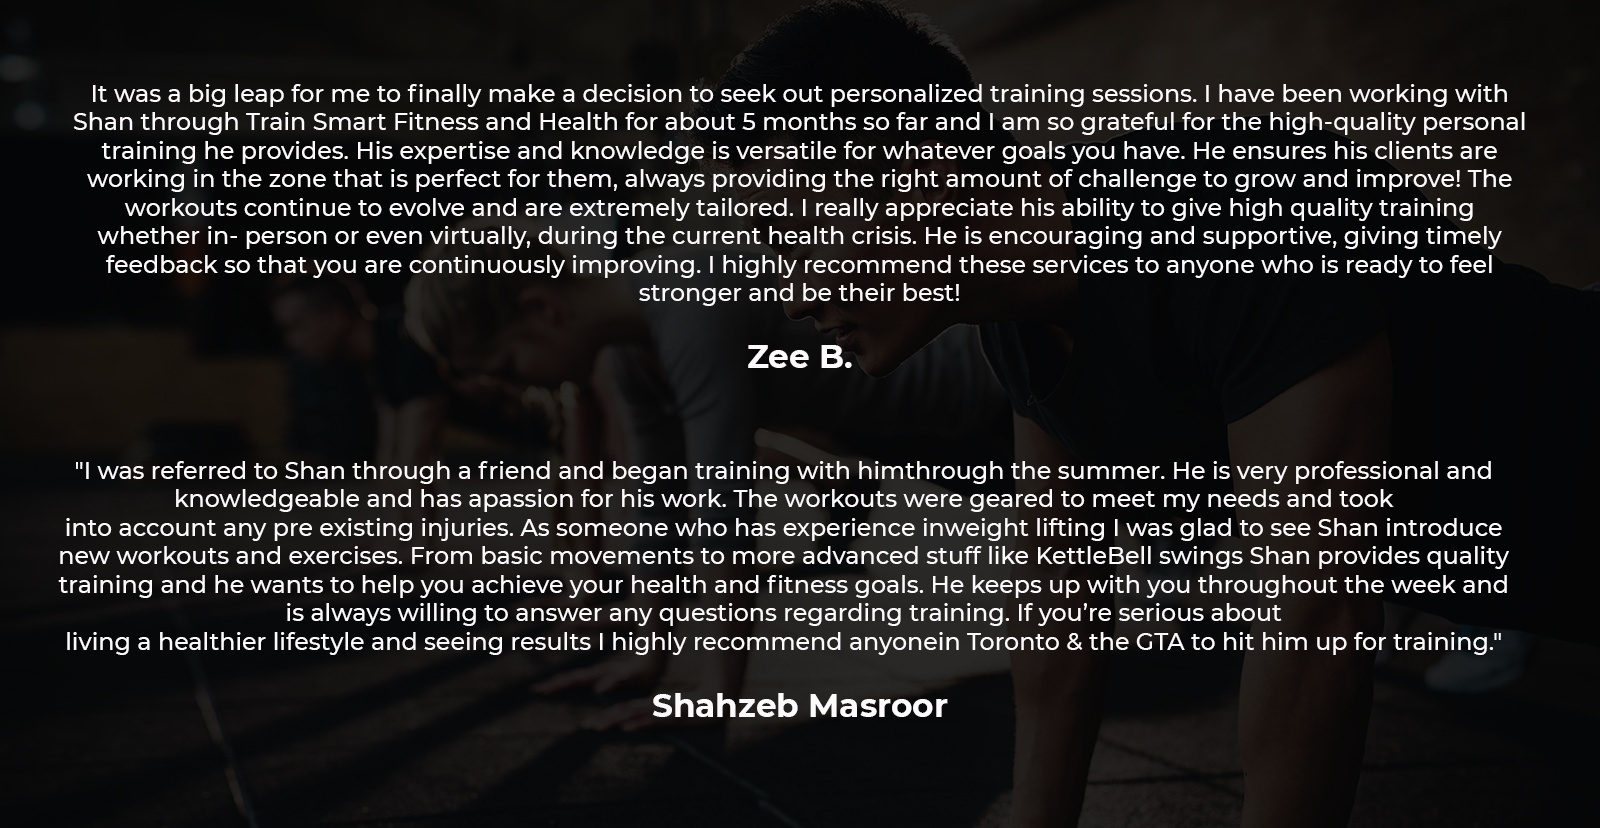 Client Review - Online Personal Training Services Mississauga by Train Smart Fitness & Health